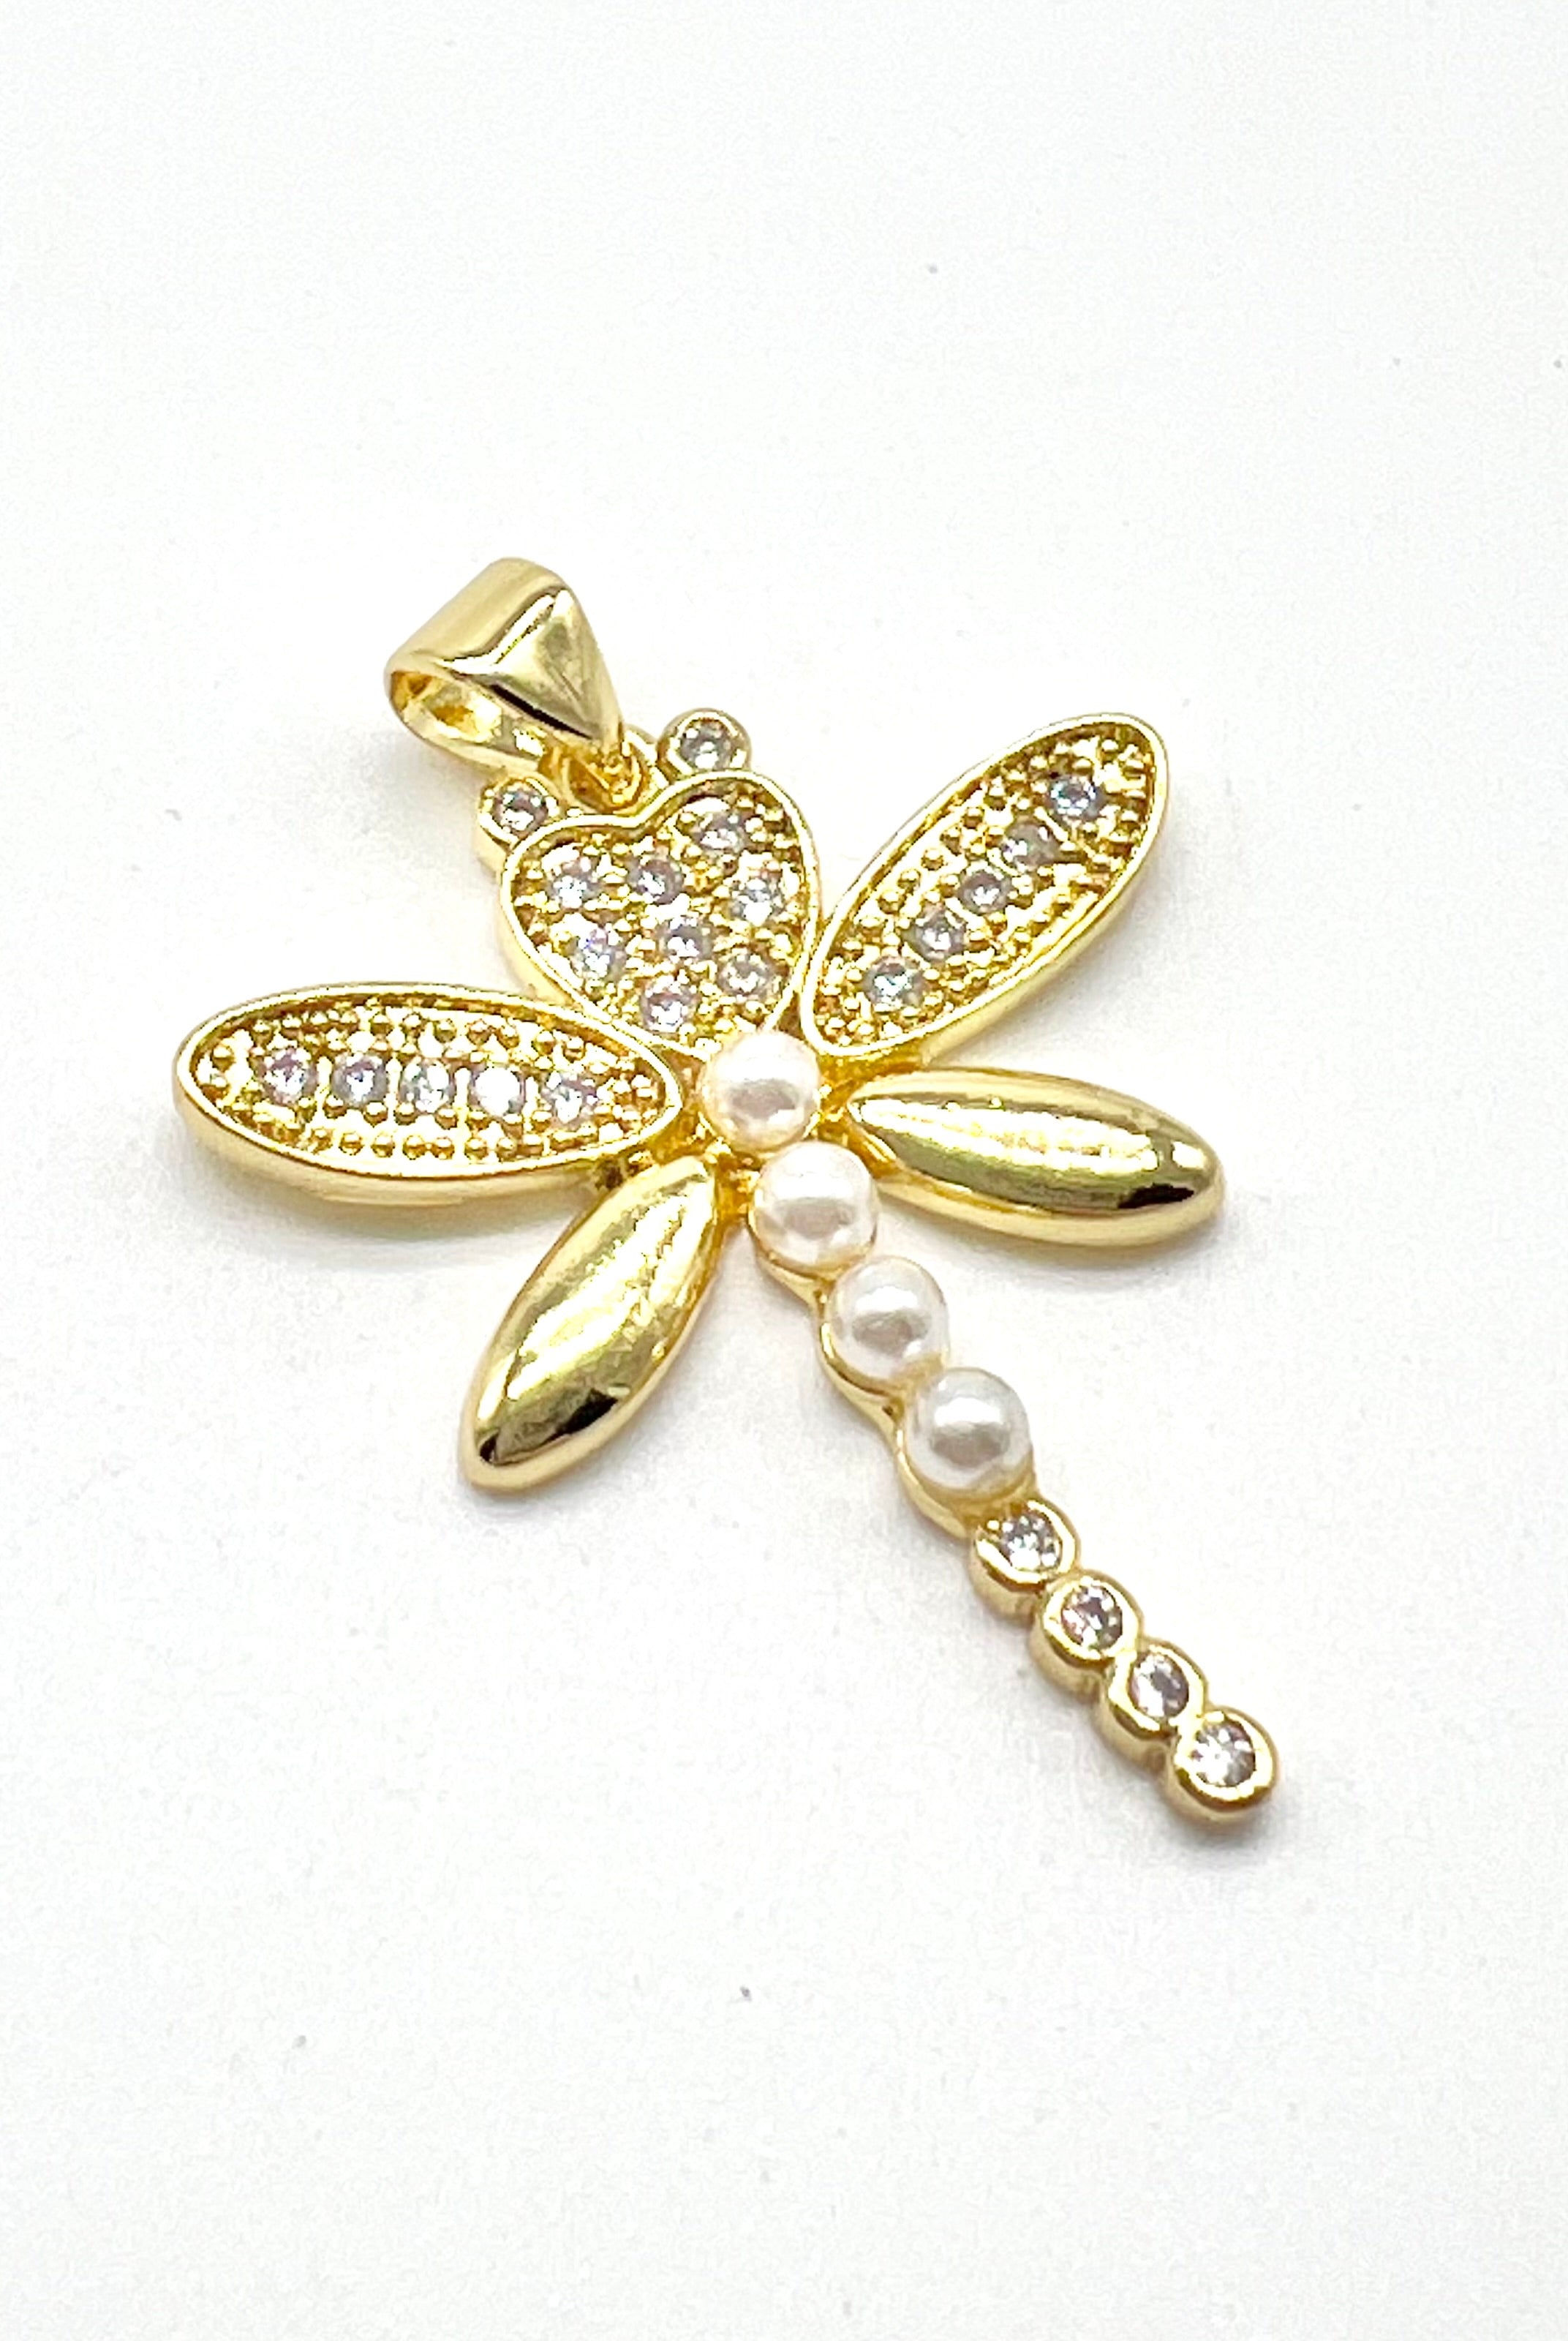 Dragonfly Charm-310 Jewelry-Treasure Jewels-Heathered Boho Boutique, Women's Fashion and Accessories in Palmetto, FL